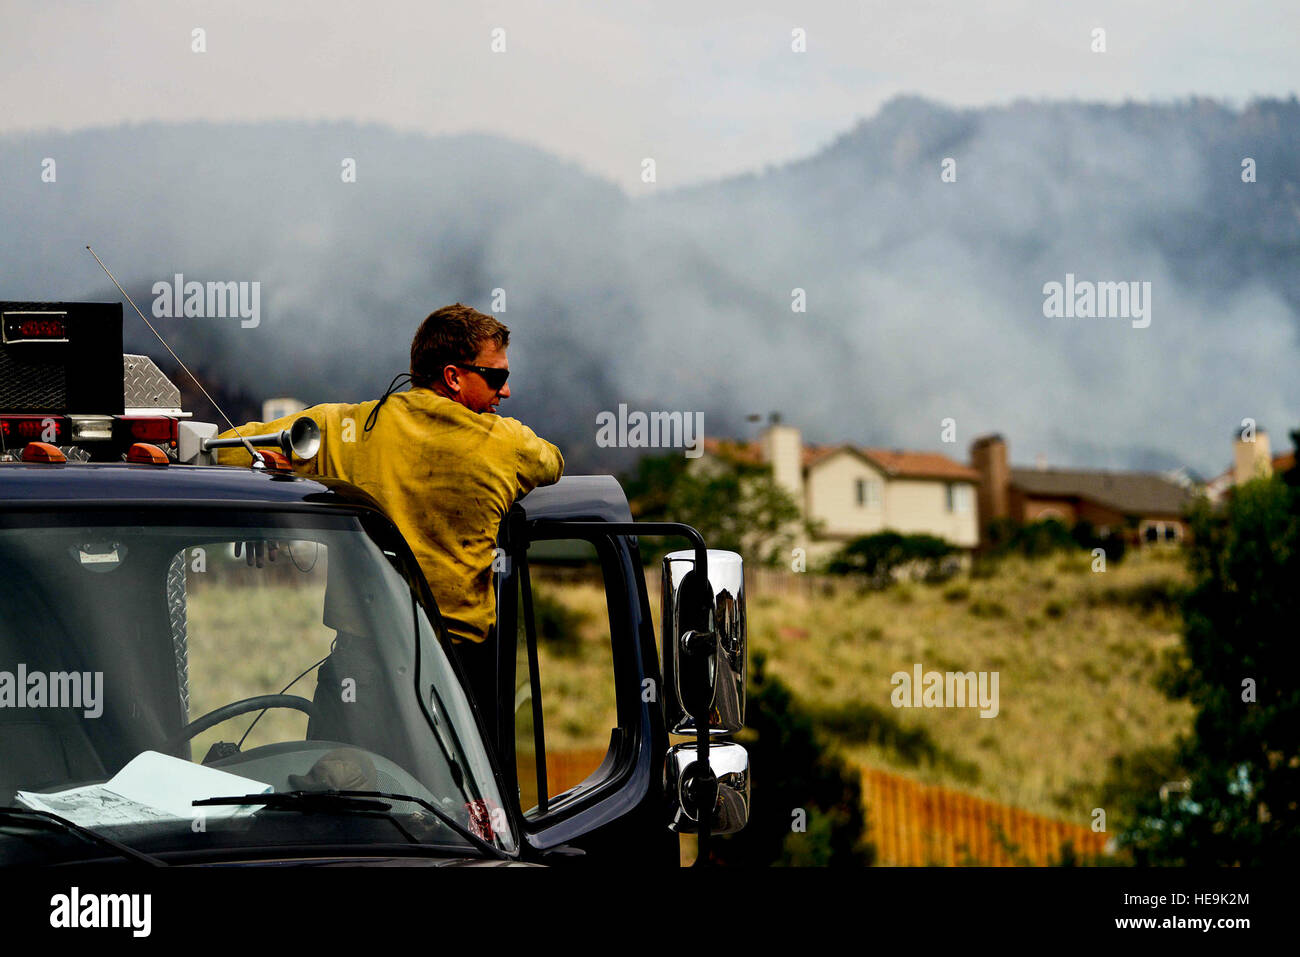 Vandenberg Air Force Base Hot Shot fire fighter Richard Strange looks out at his worksite for the day on June 28, 2012 in the Mount Saint Francois area of Colorado Springs, Co. His team will be cutting a fire line while helping to battle several fires in Waldo Canyon.  The Waldo Canyon fire has grown to 18,500 acres and burned over 300 homes. Currently, more than 90 firefighters from the Academy, along with assets from Air Force Space Command; F.E. Warren Air Force Base, Wyo.; Fort Carson, Colo.; and the local community continue to fight the Waldo Canyon fire.(: Master Sgt. Jeremy Lock) (Relea Stock Photo